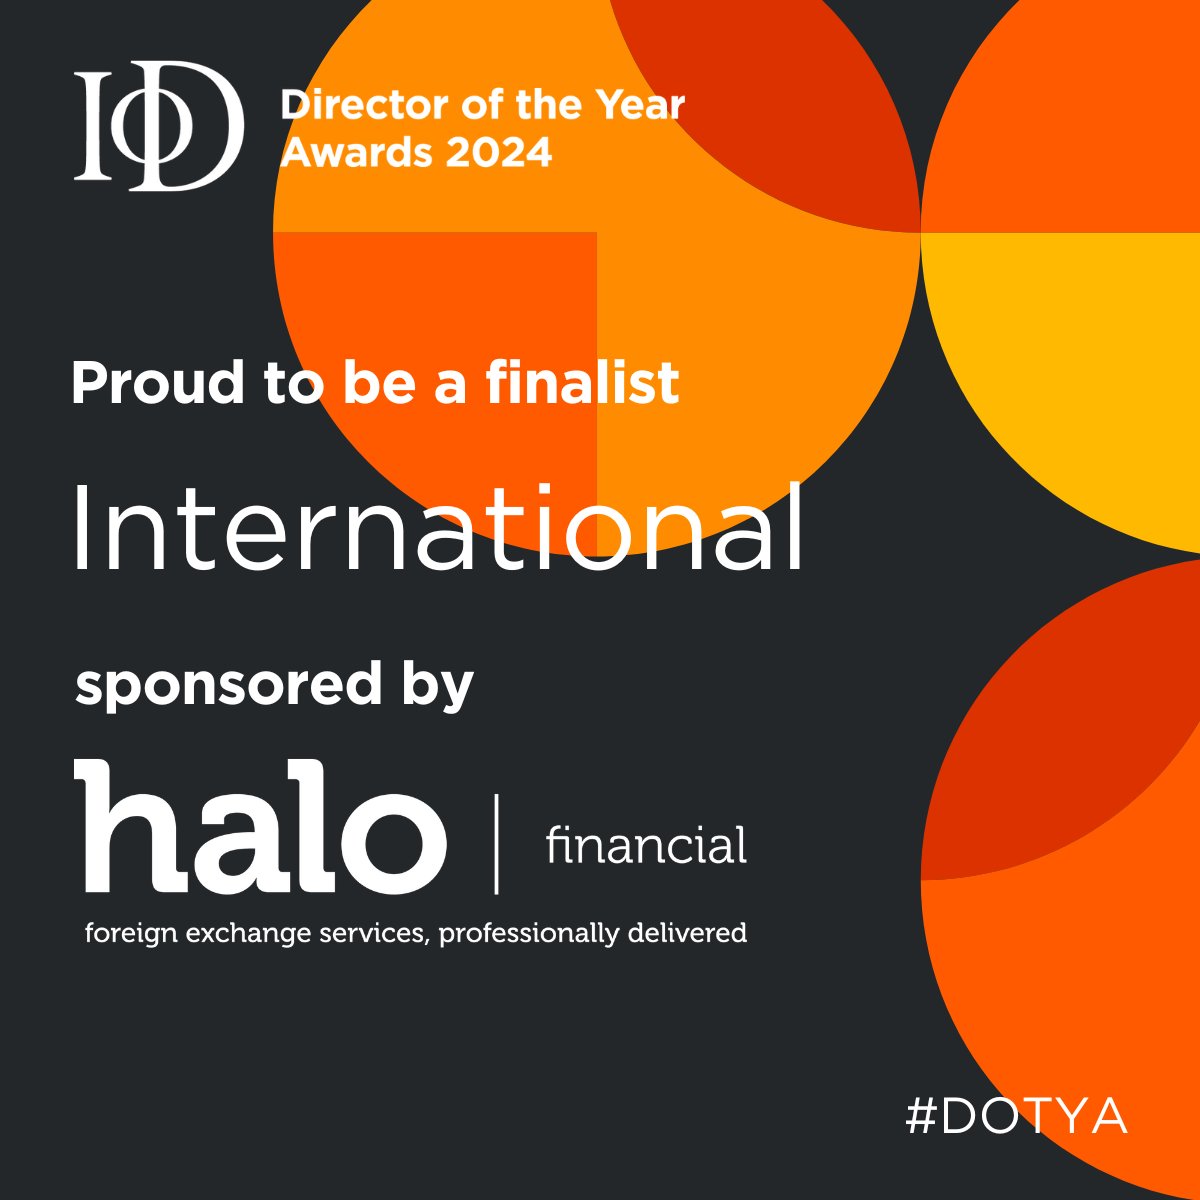 MAUVE NEWS | Did you know? Our CEO Ann Ellis was recently named a finalist for an @IoDWales #DOTYA in the 'International' category. The award recognises global business leaders who've developed a strong overseas market share, thanks to delivering outstanding service.